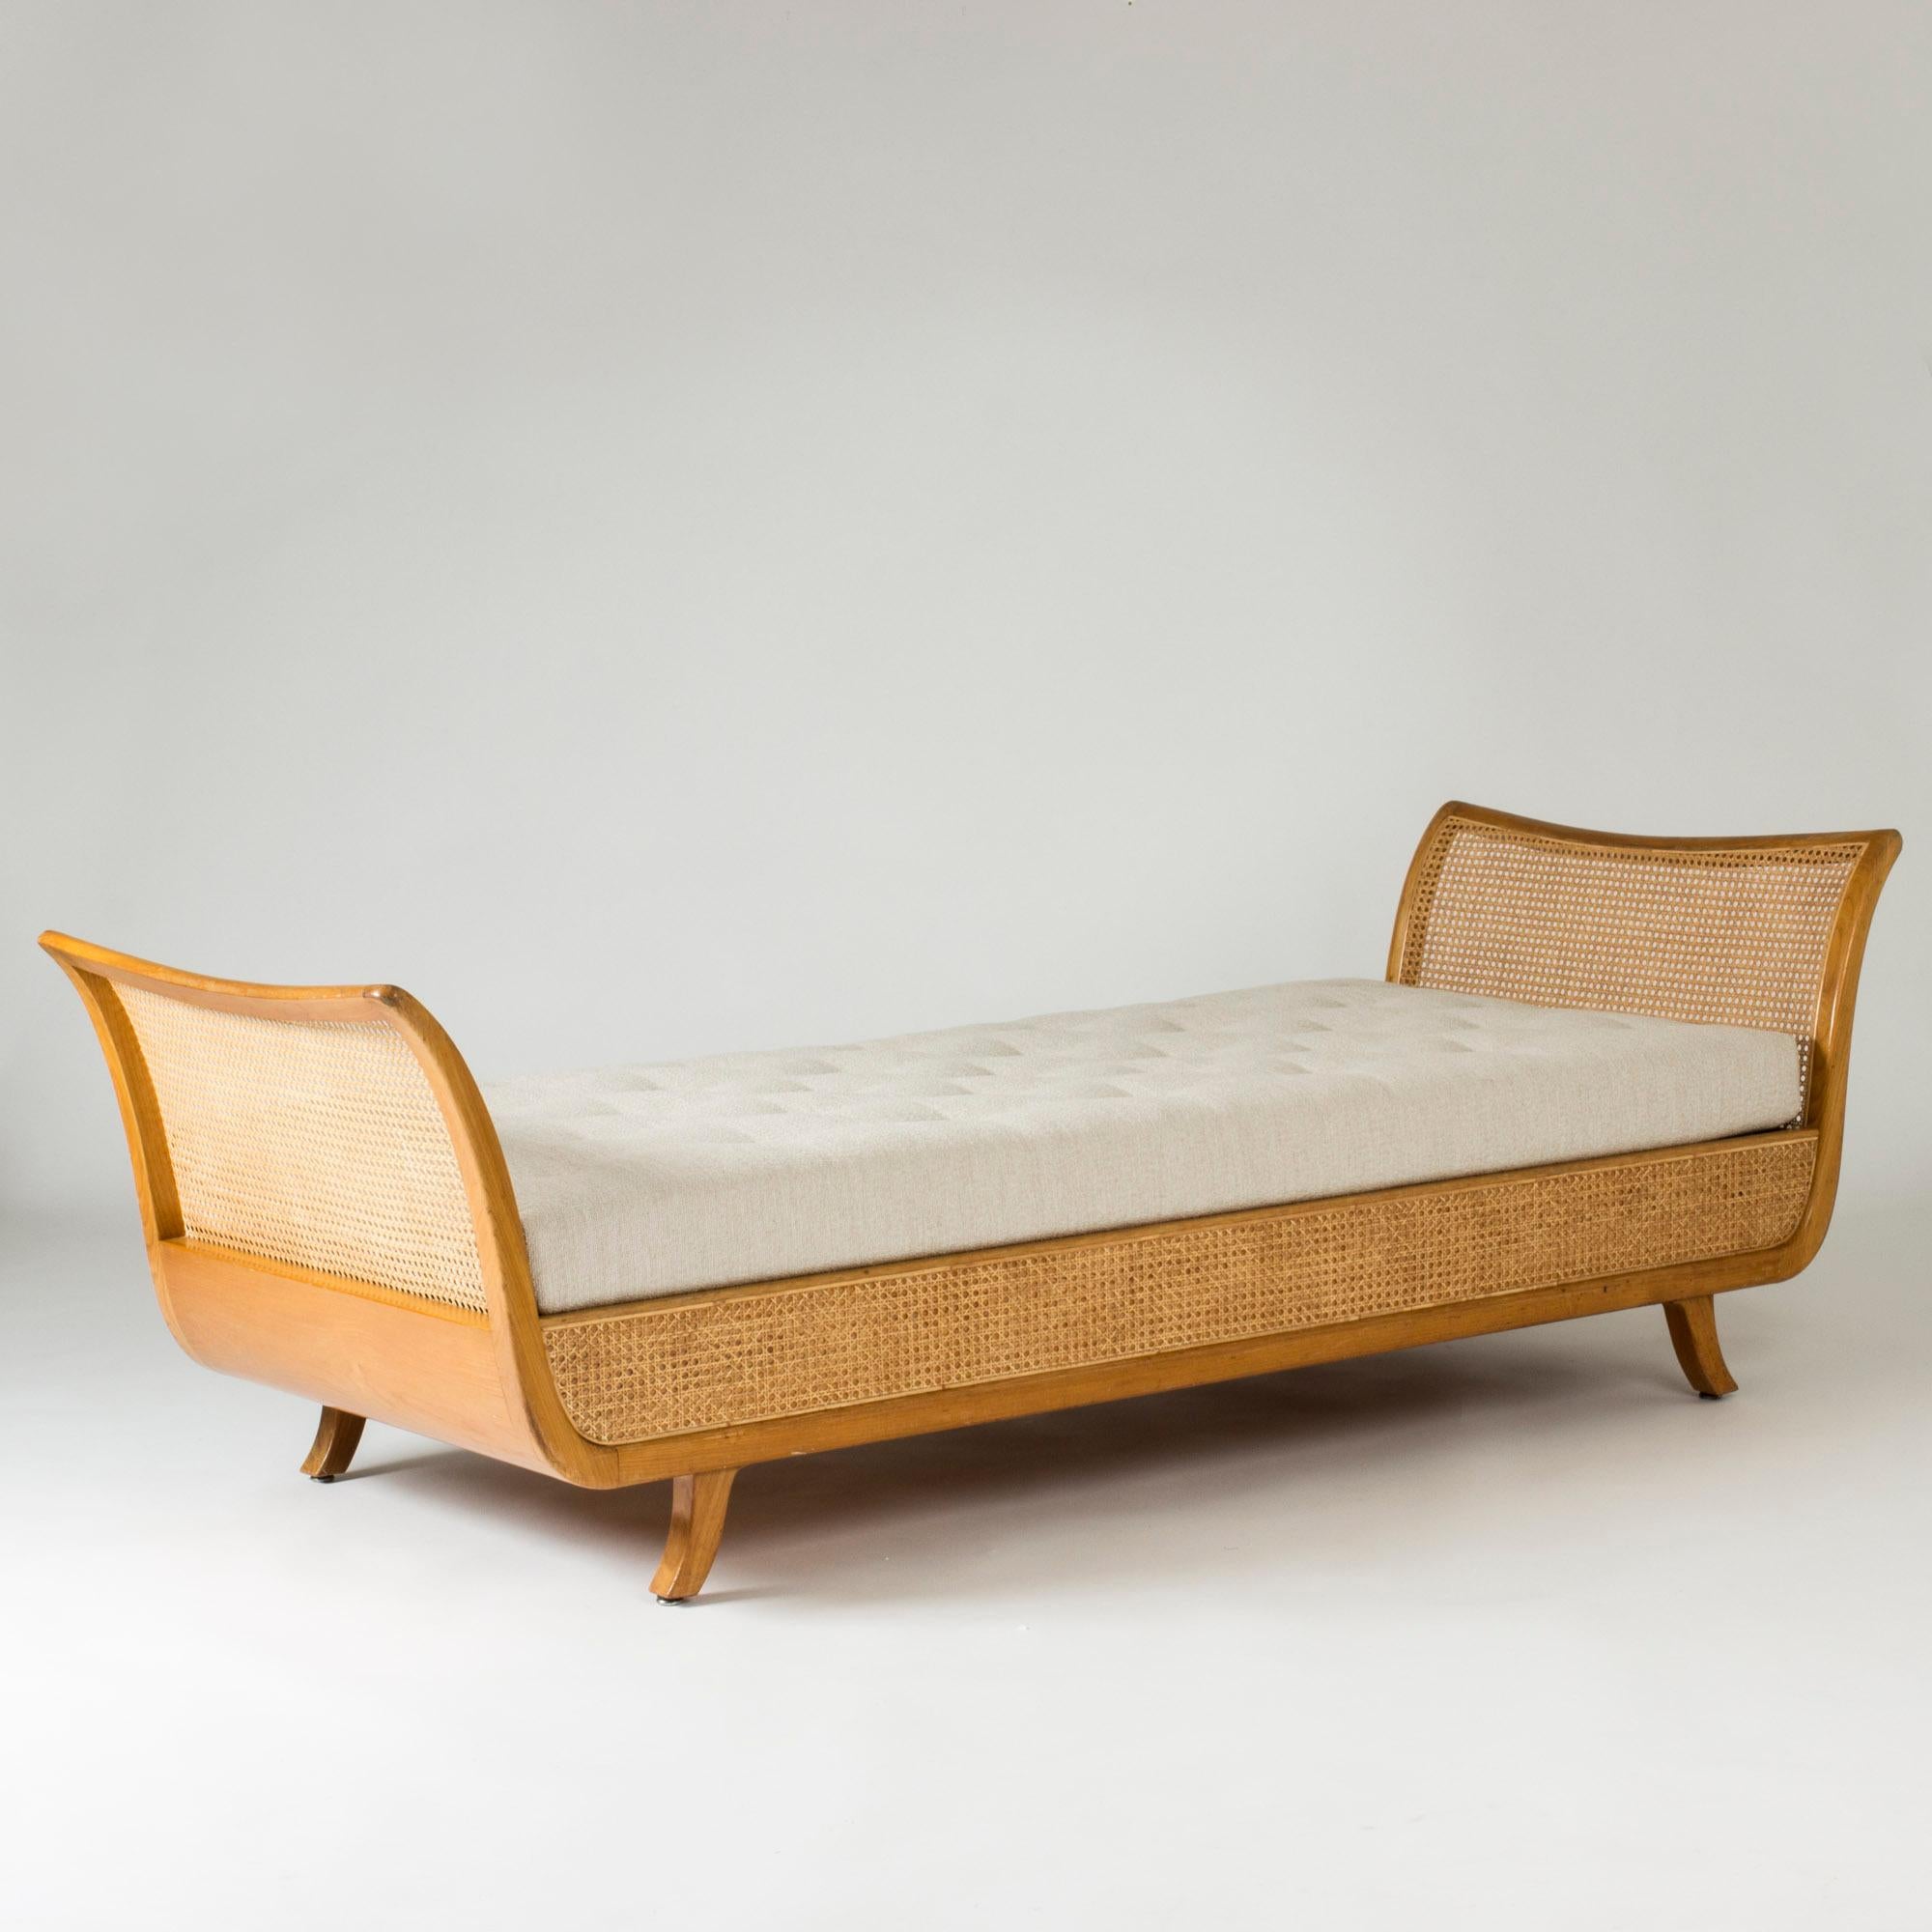 Beautiful Swedish Modern daybed, made from mahogany. Beautiful curved lines. Sides and ends dressed with rattan. Mattress upholstered with bouclé fabric, brown leather buttons. Hidden space underneath the mattress, which can be used for storage.